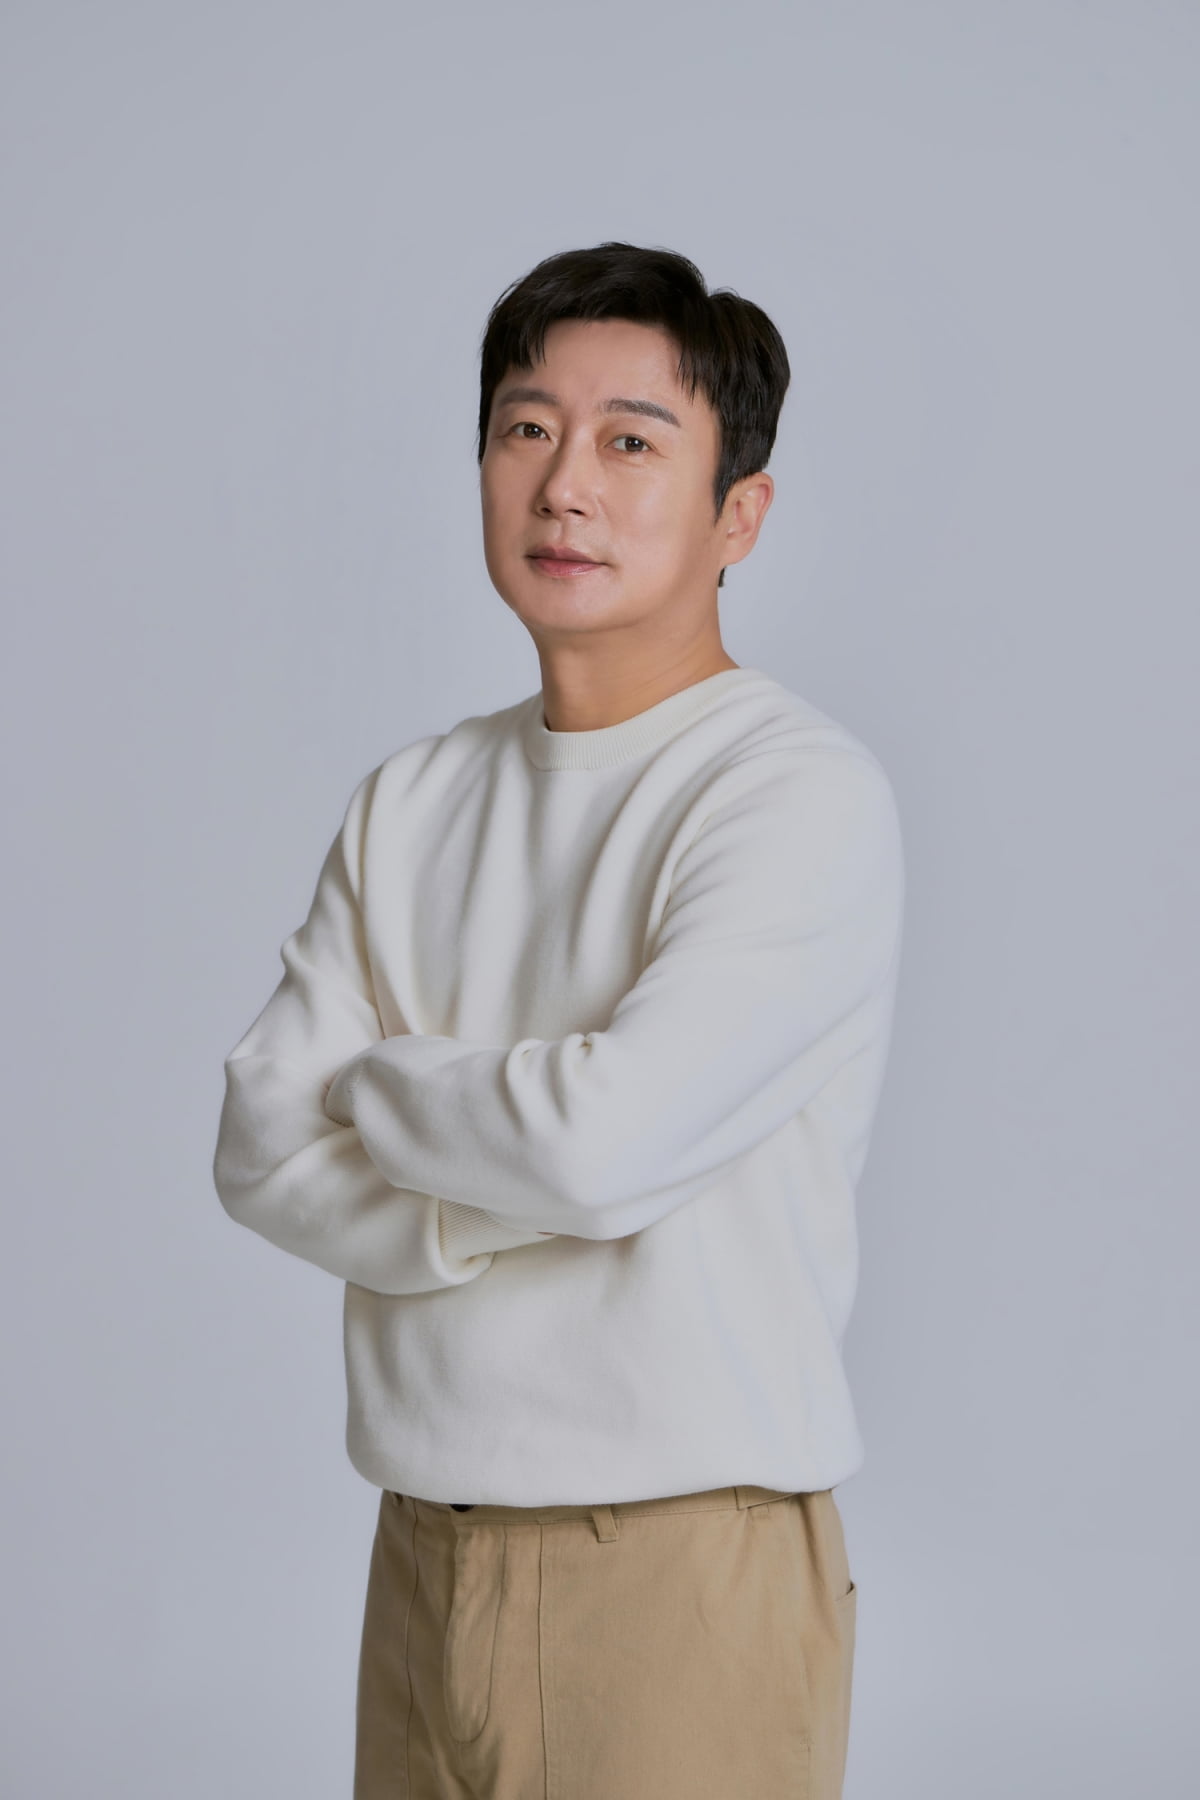 Lee Soo-geun leaves SM C&C after 10 years of service and signs exclusive contract with Big Planet Made